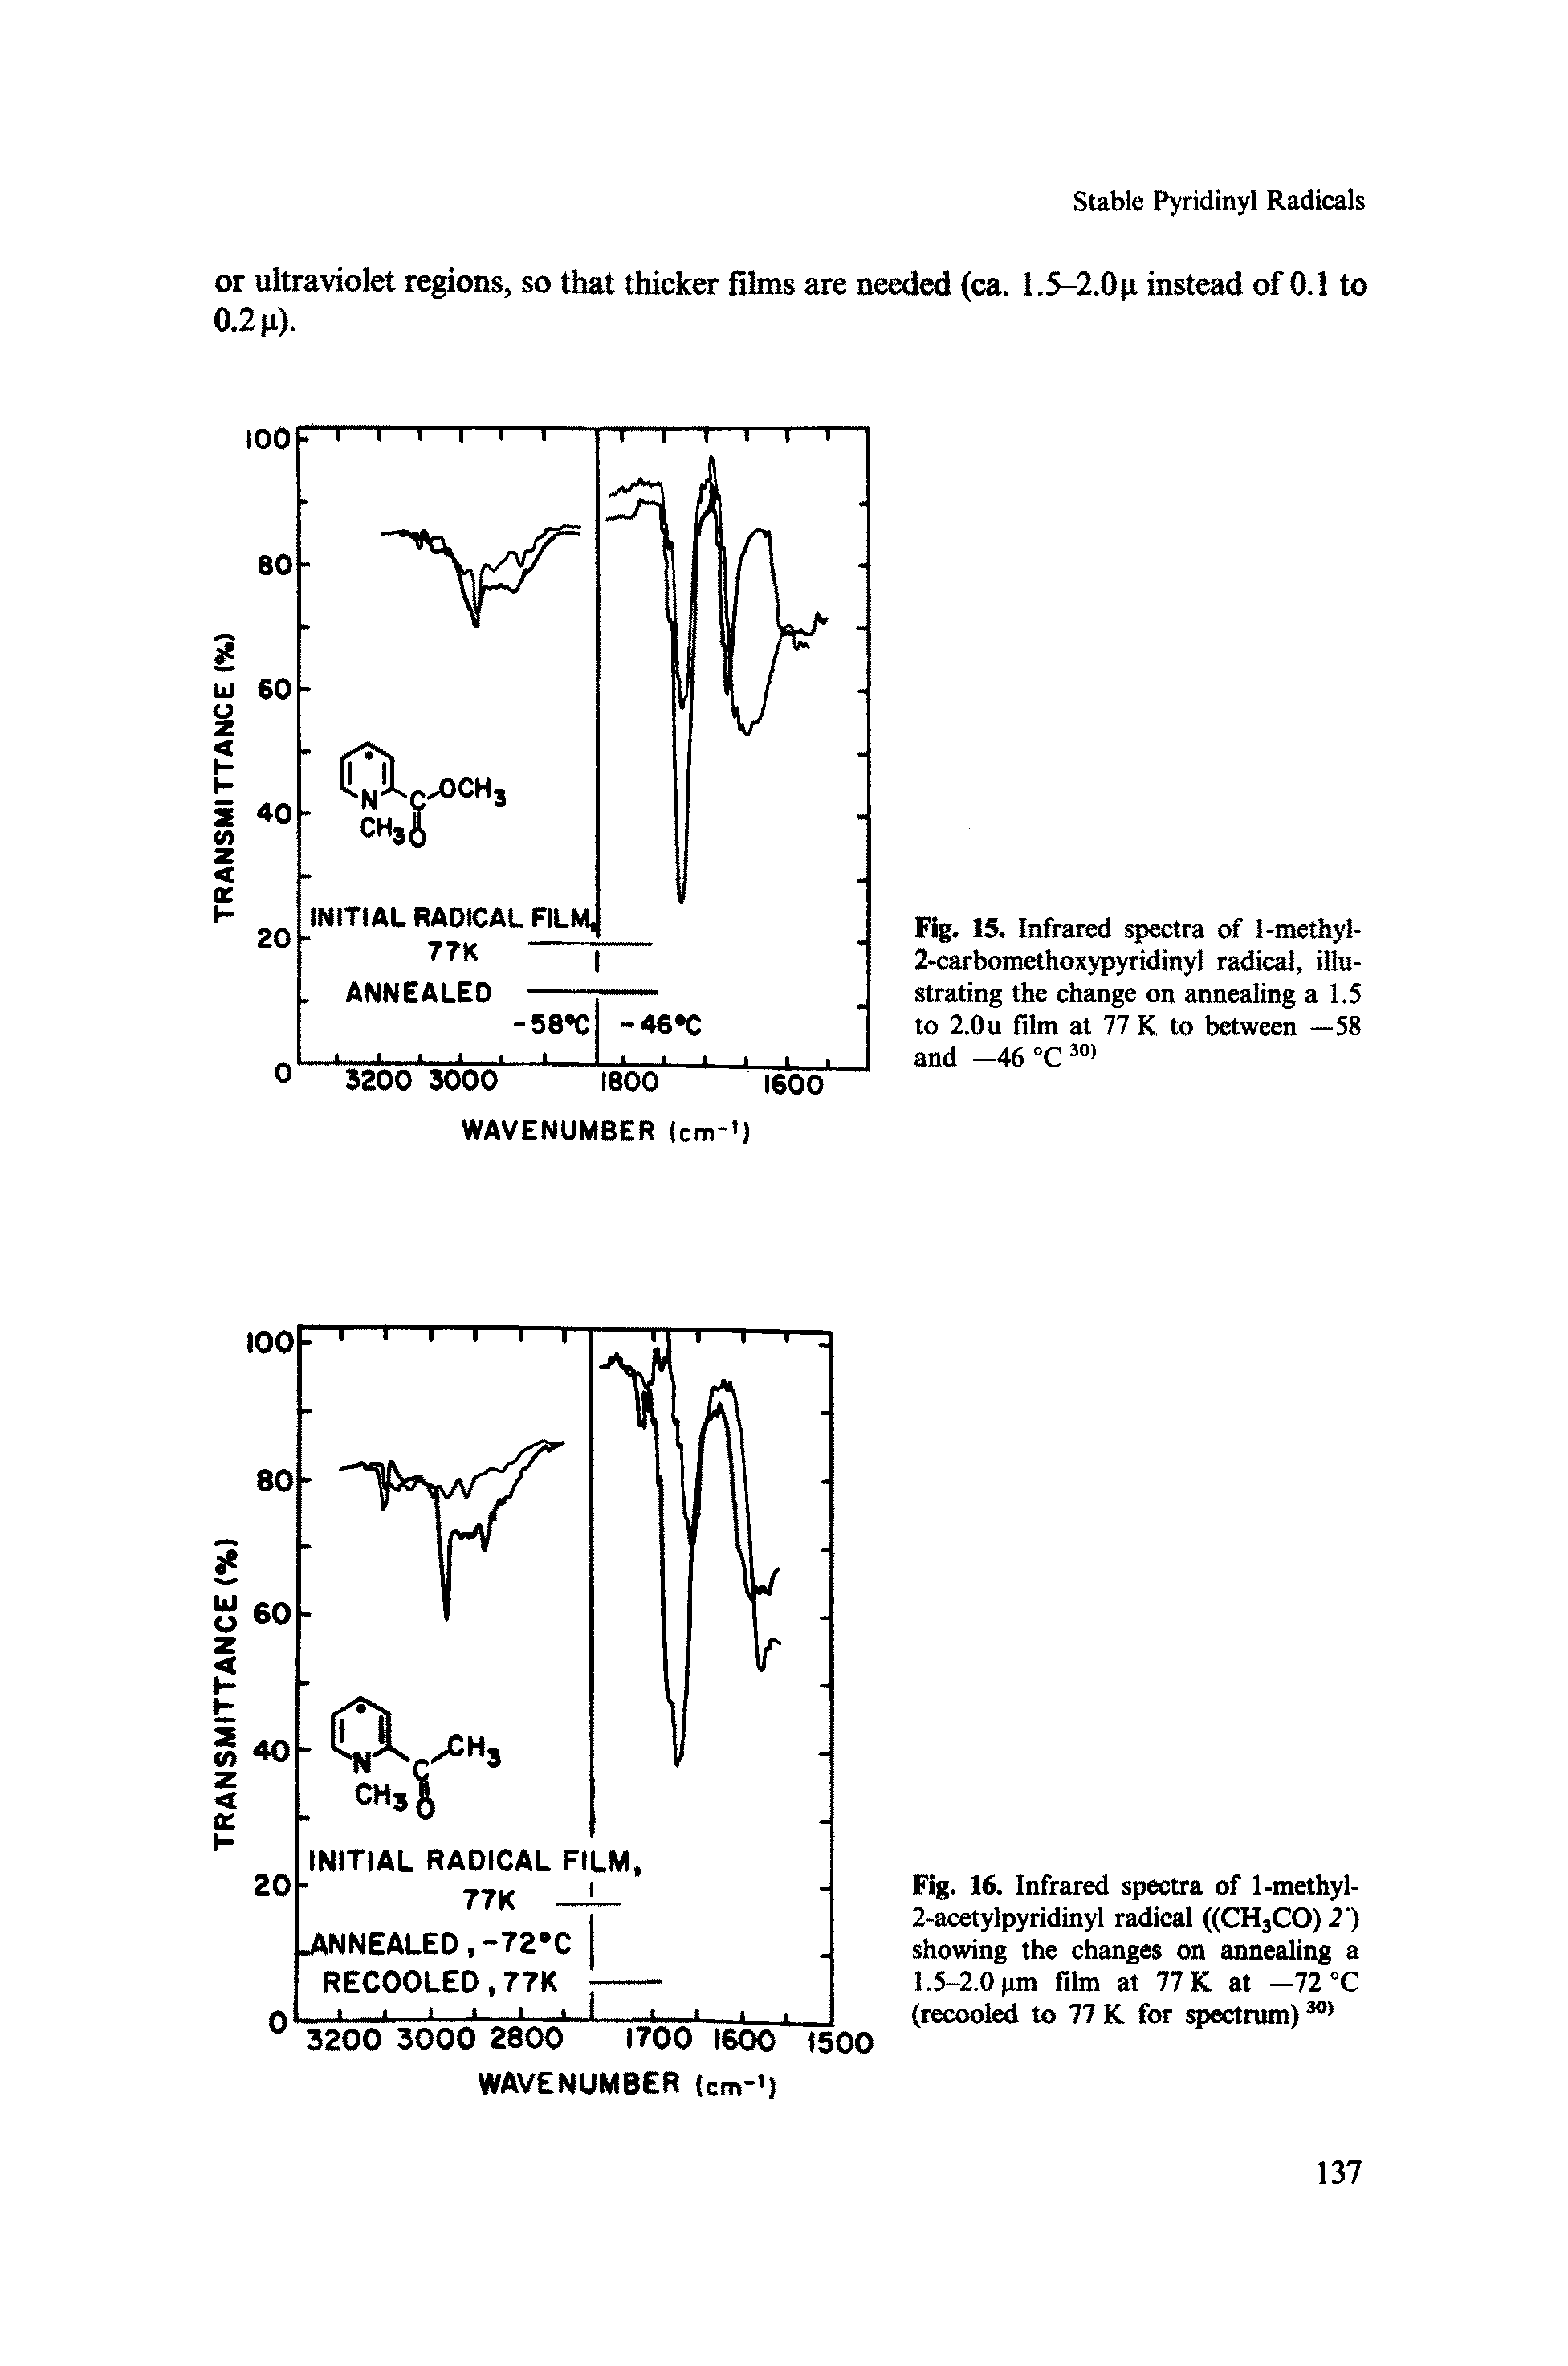 Fig. 16. Infrared spectra of 1-methyl-2-acetylpyridinyl radical ((CH3CO) 2 ) showing the changes on annealing a 1.5-2.0 pm film at 77 K at -72 X (recooled to 77 K for spectrum)...